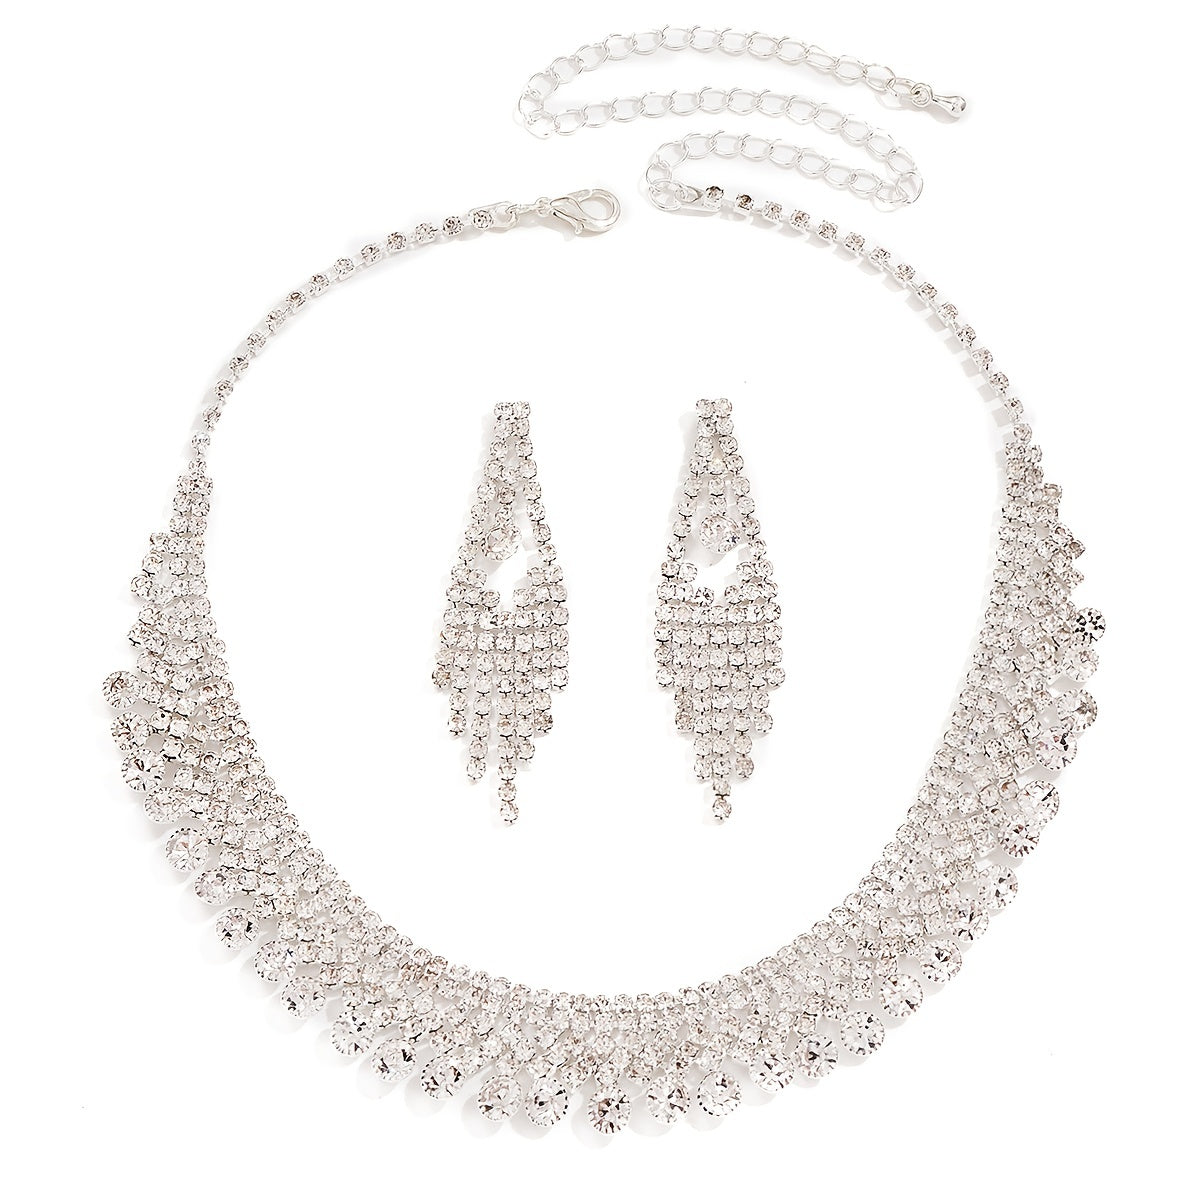 2pcs/set Elegant Crystal Stone Tassel Jewelry Set - Silver Plated Earrings and Necklace